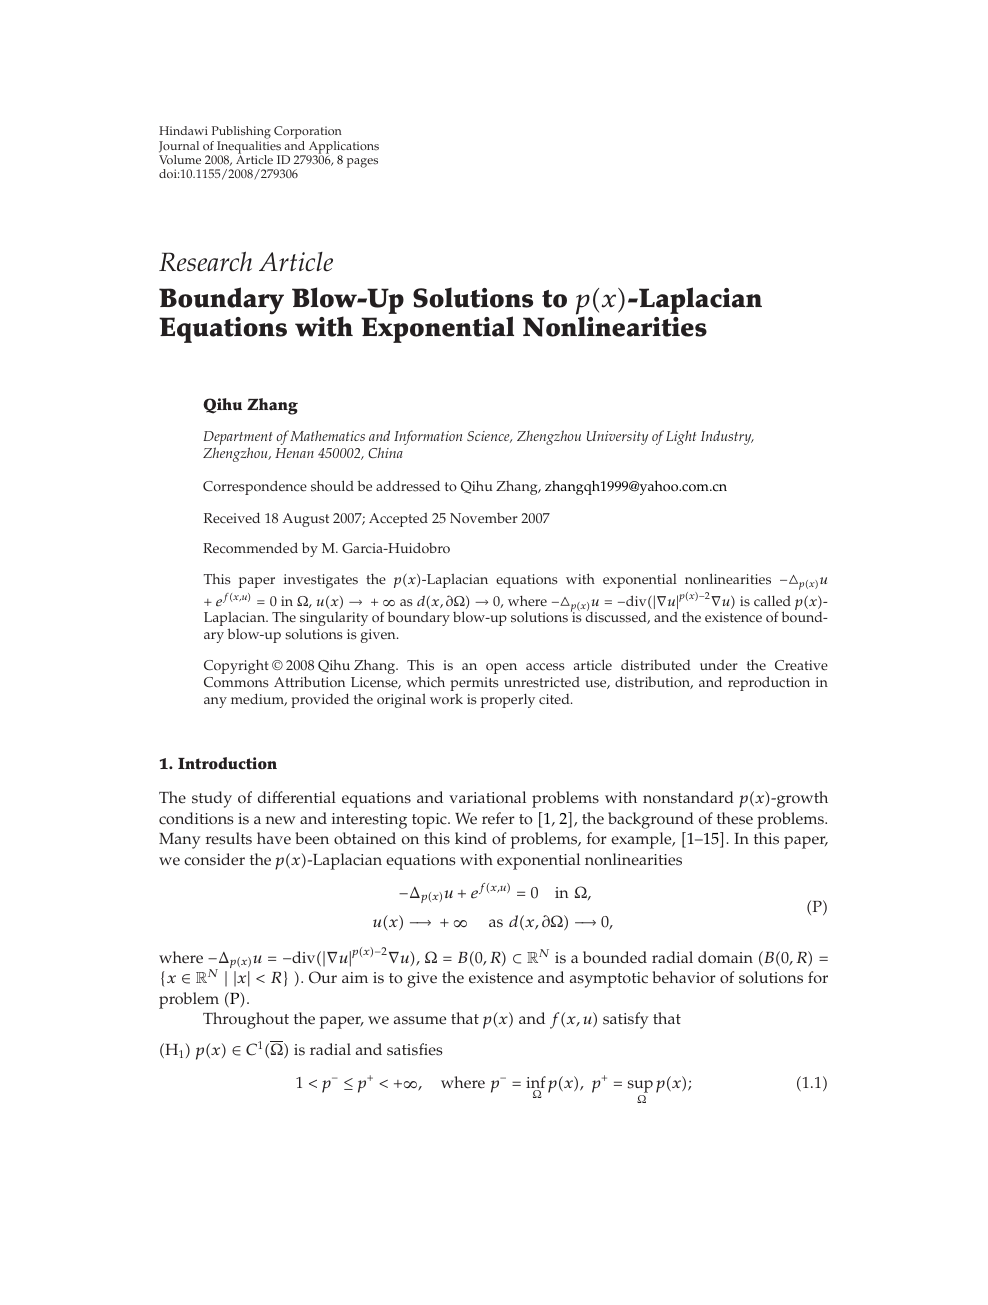 Boundary Blow Up Solutions To P X Laplacian Equations With Exponential Nonlinearities Topic Of Research Paper In Mathematics Download Scholarly Article Pdf And Read For Free On Cyberleninka Open Science Hub